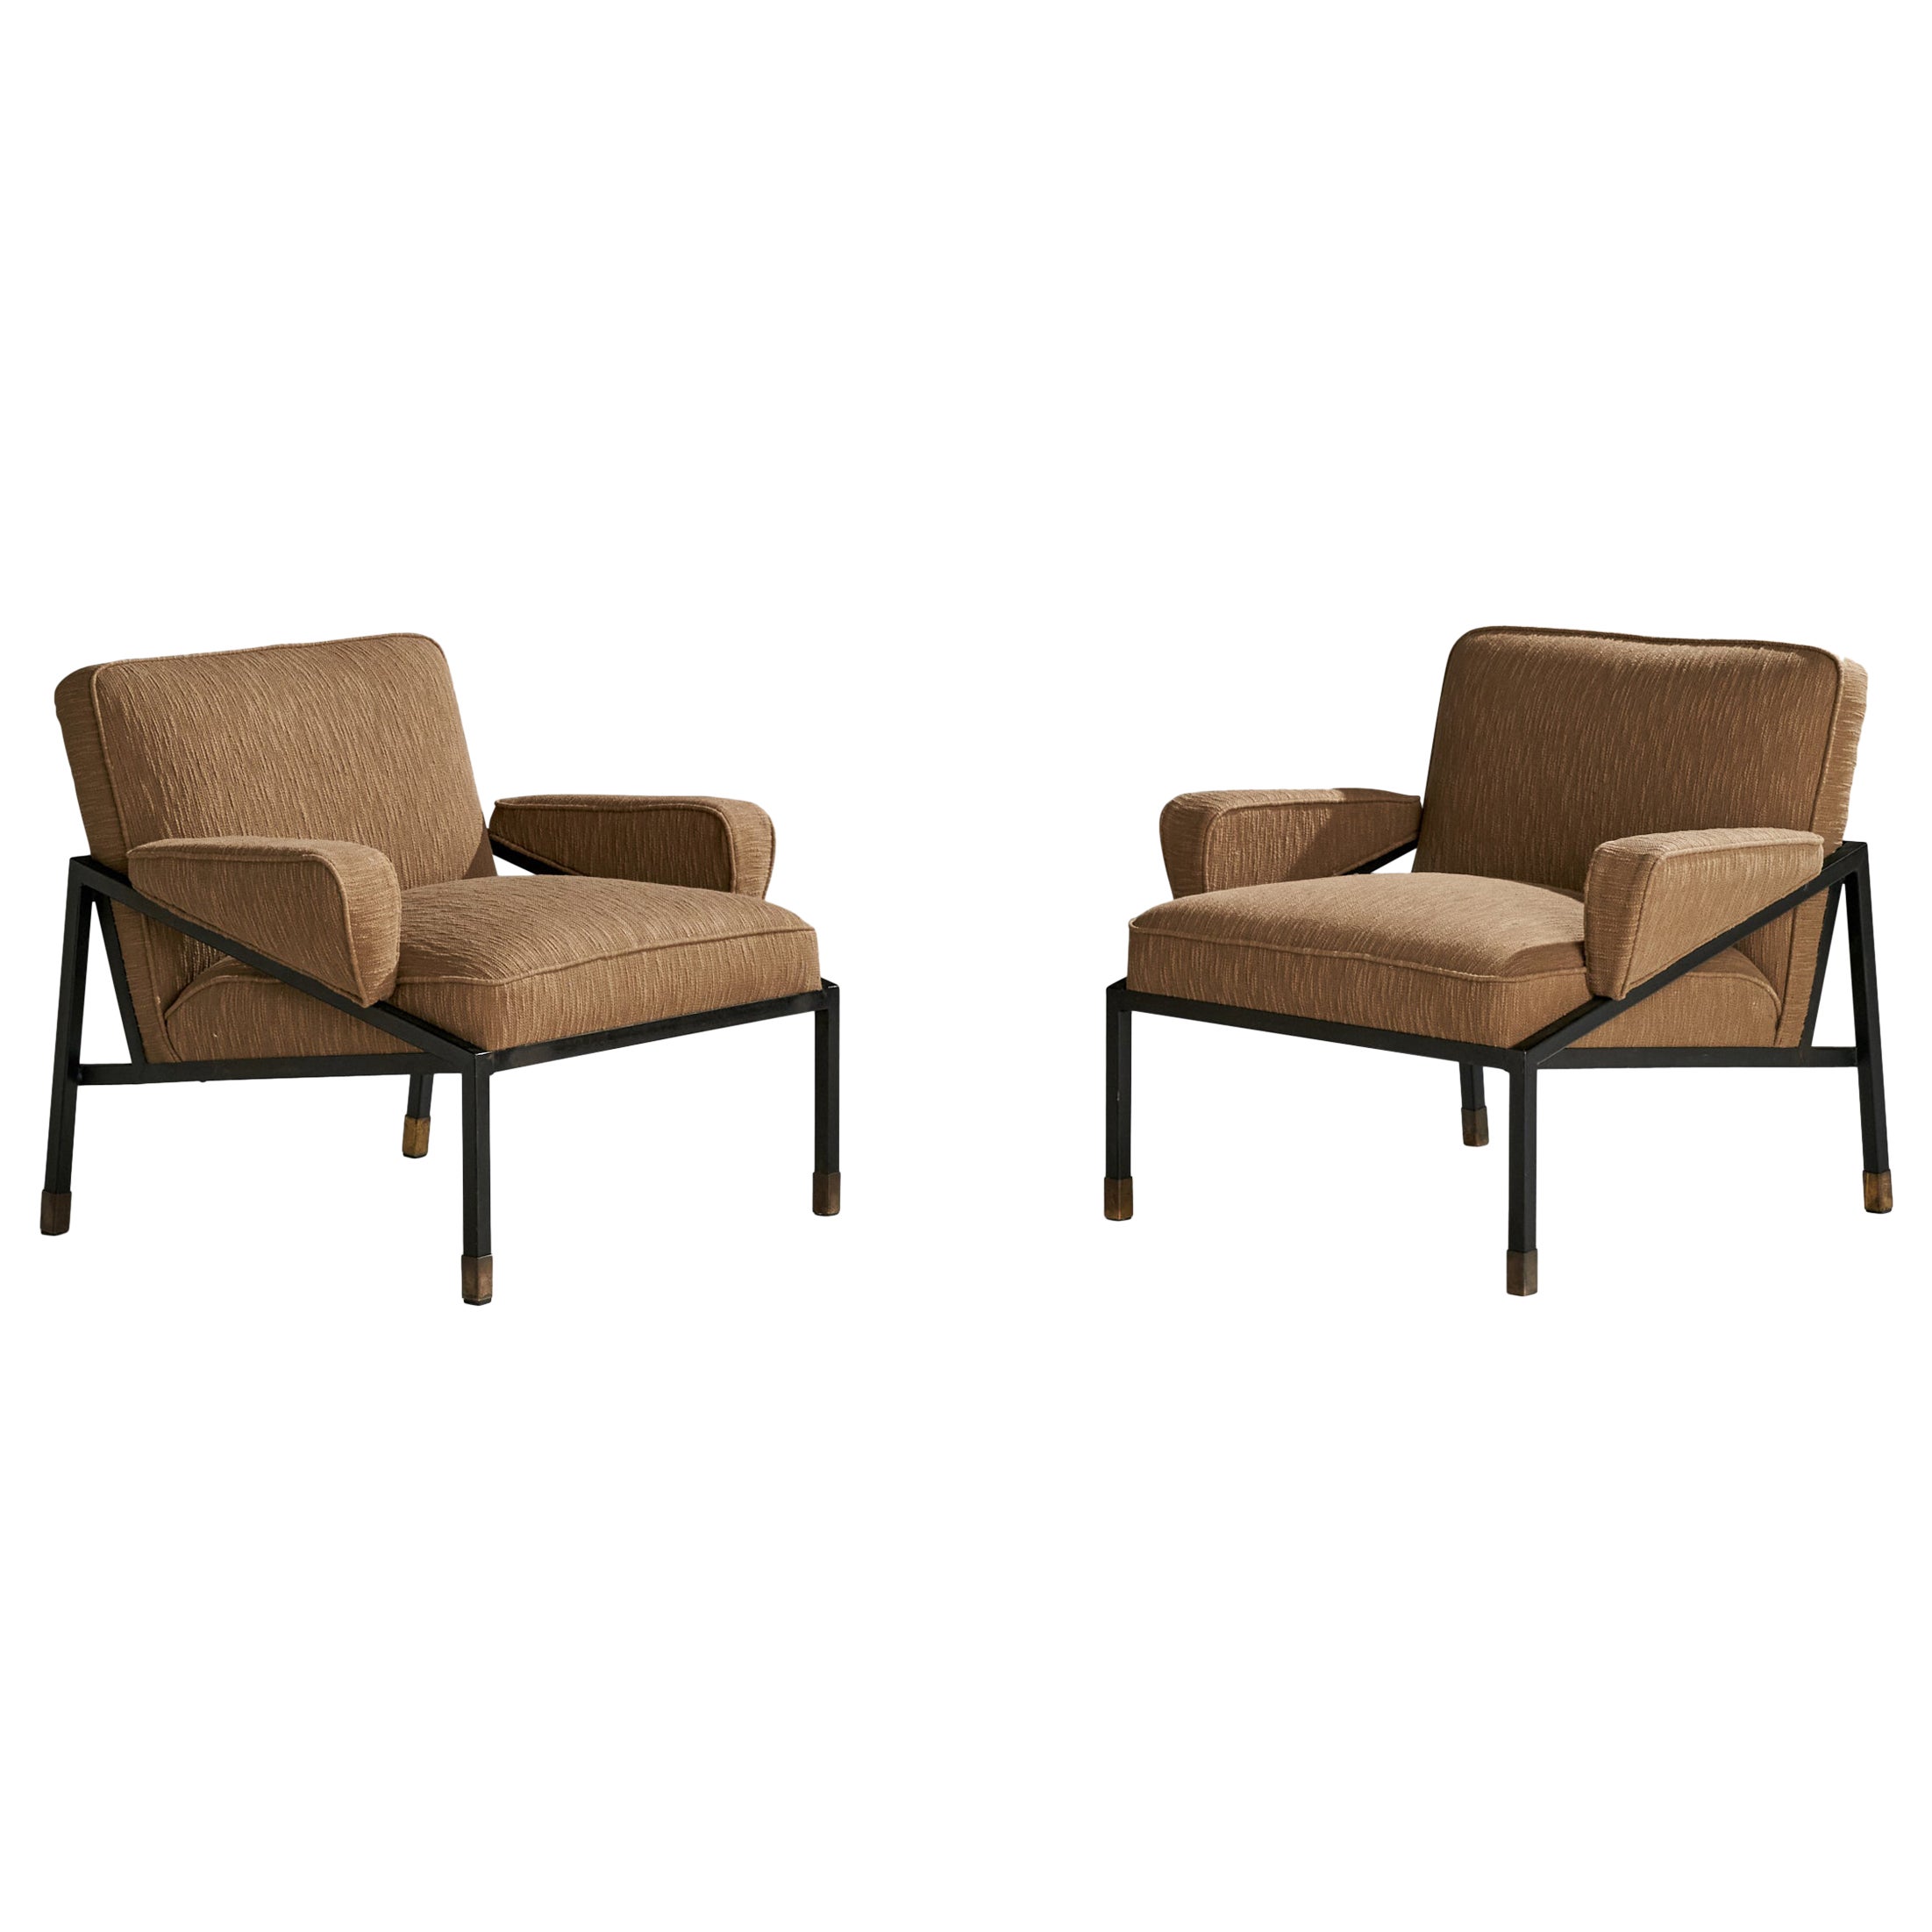 D.R. Bates and Jackson Gregory, Jr, Lounge Chairs, Metal, Fabric, USA, 1955 For Sale